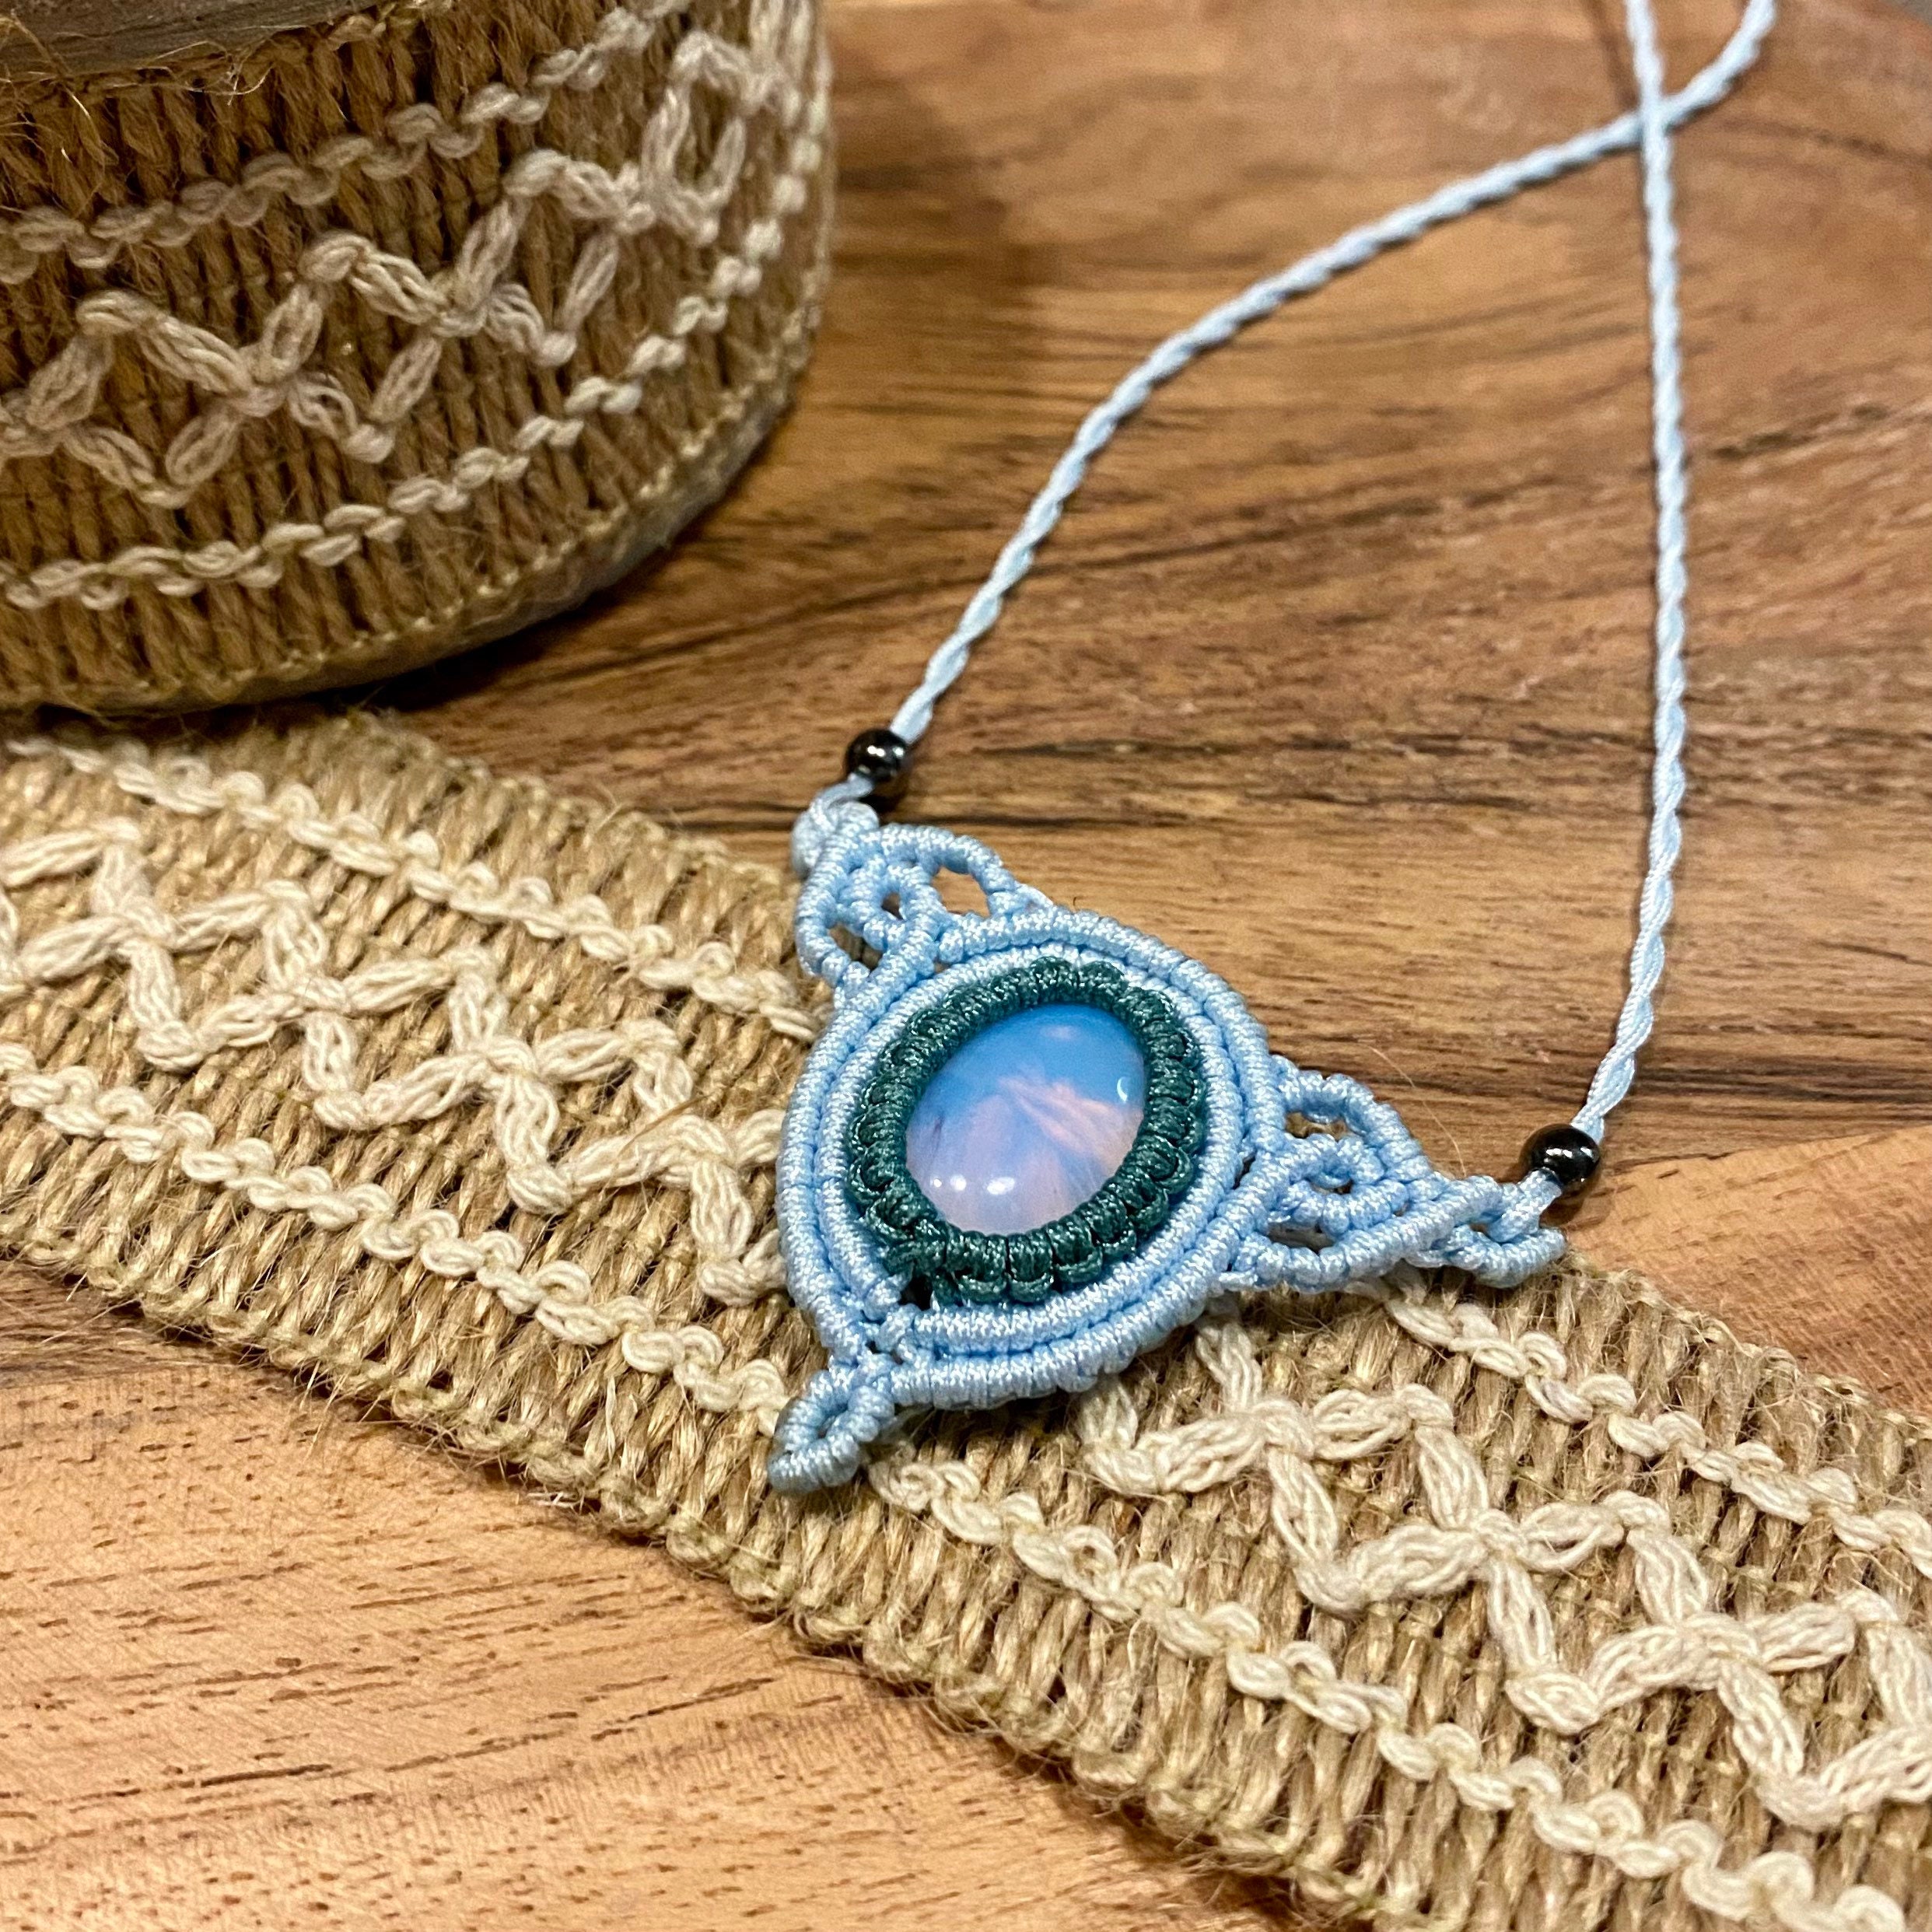 Free Course: Macrame Necklaces from YouTube | Class Central